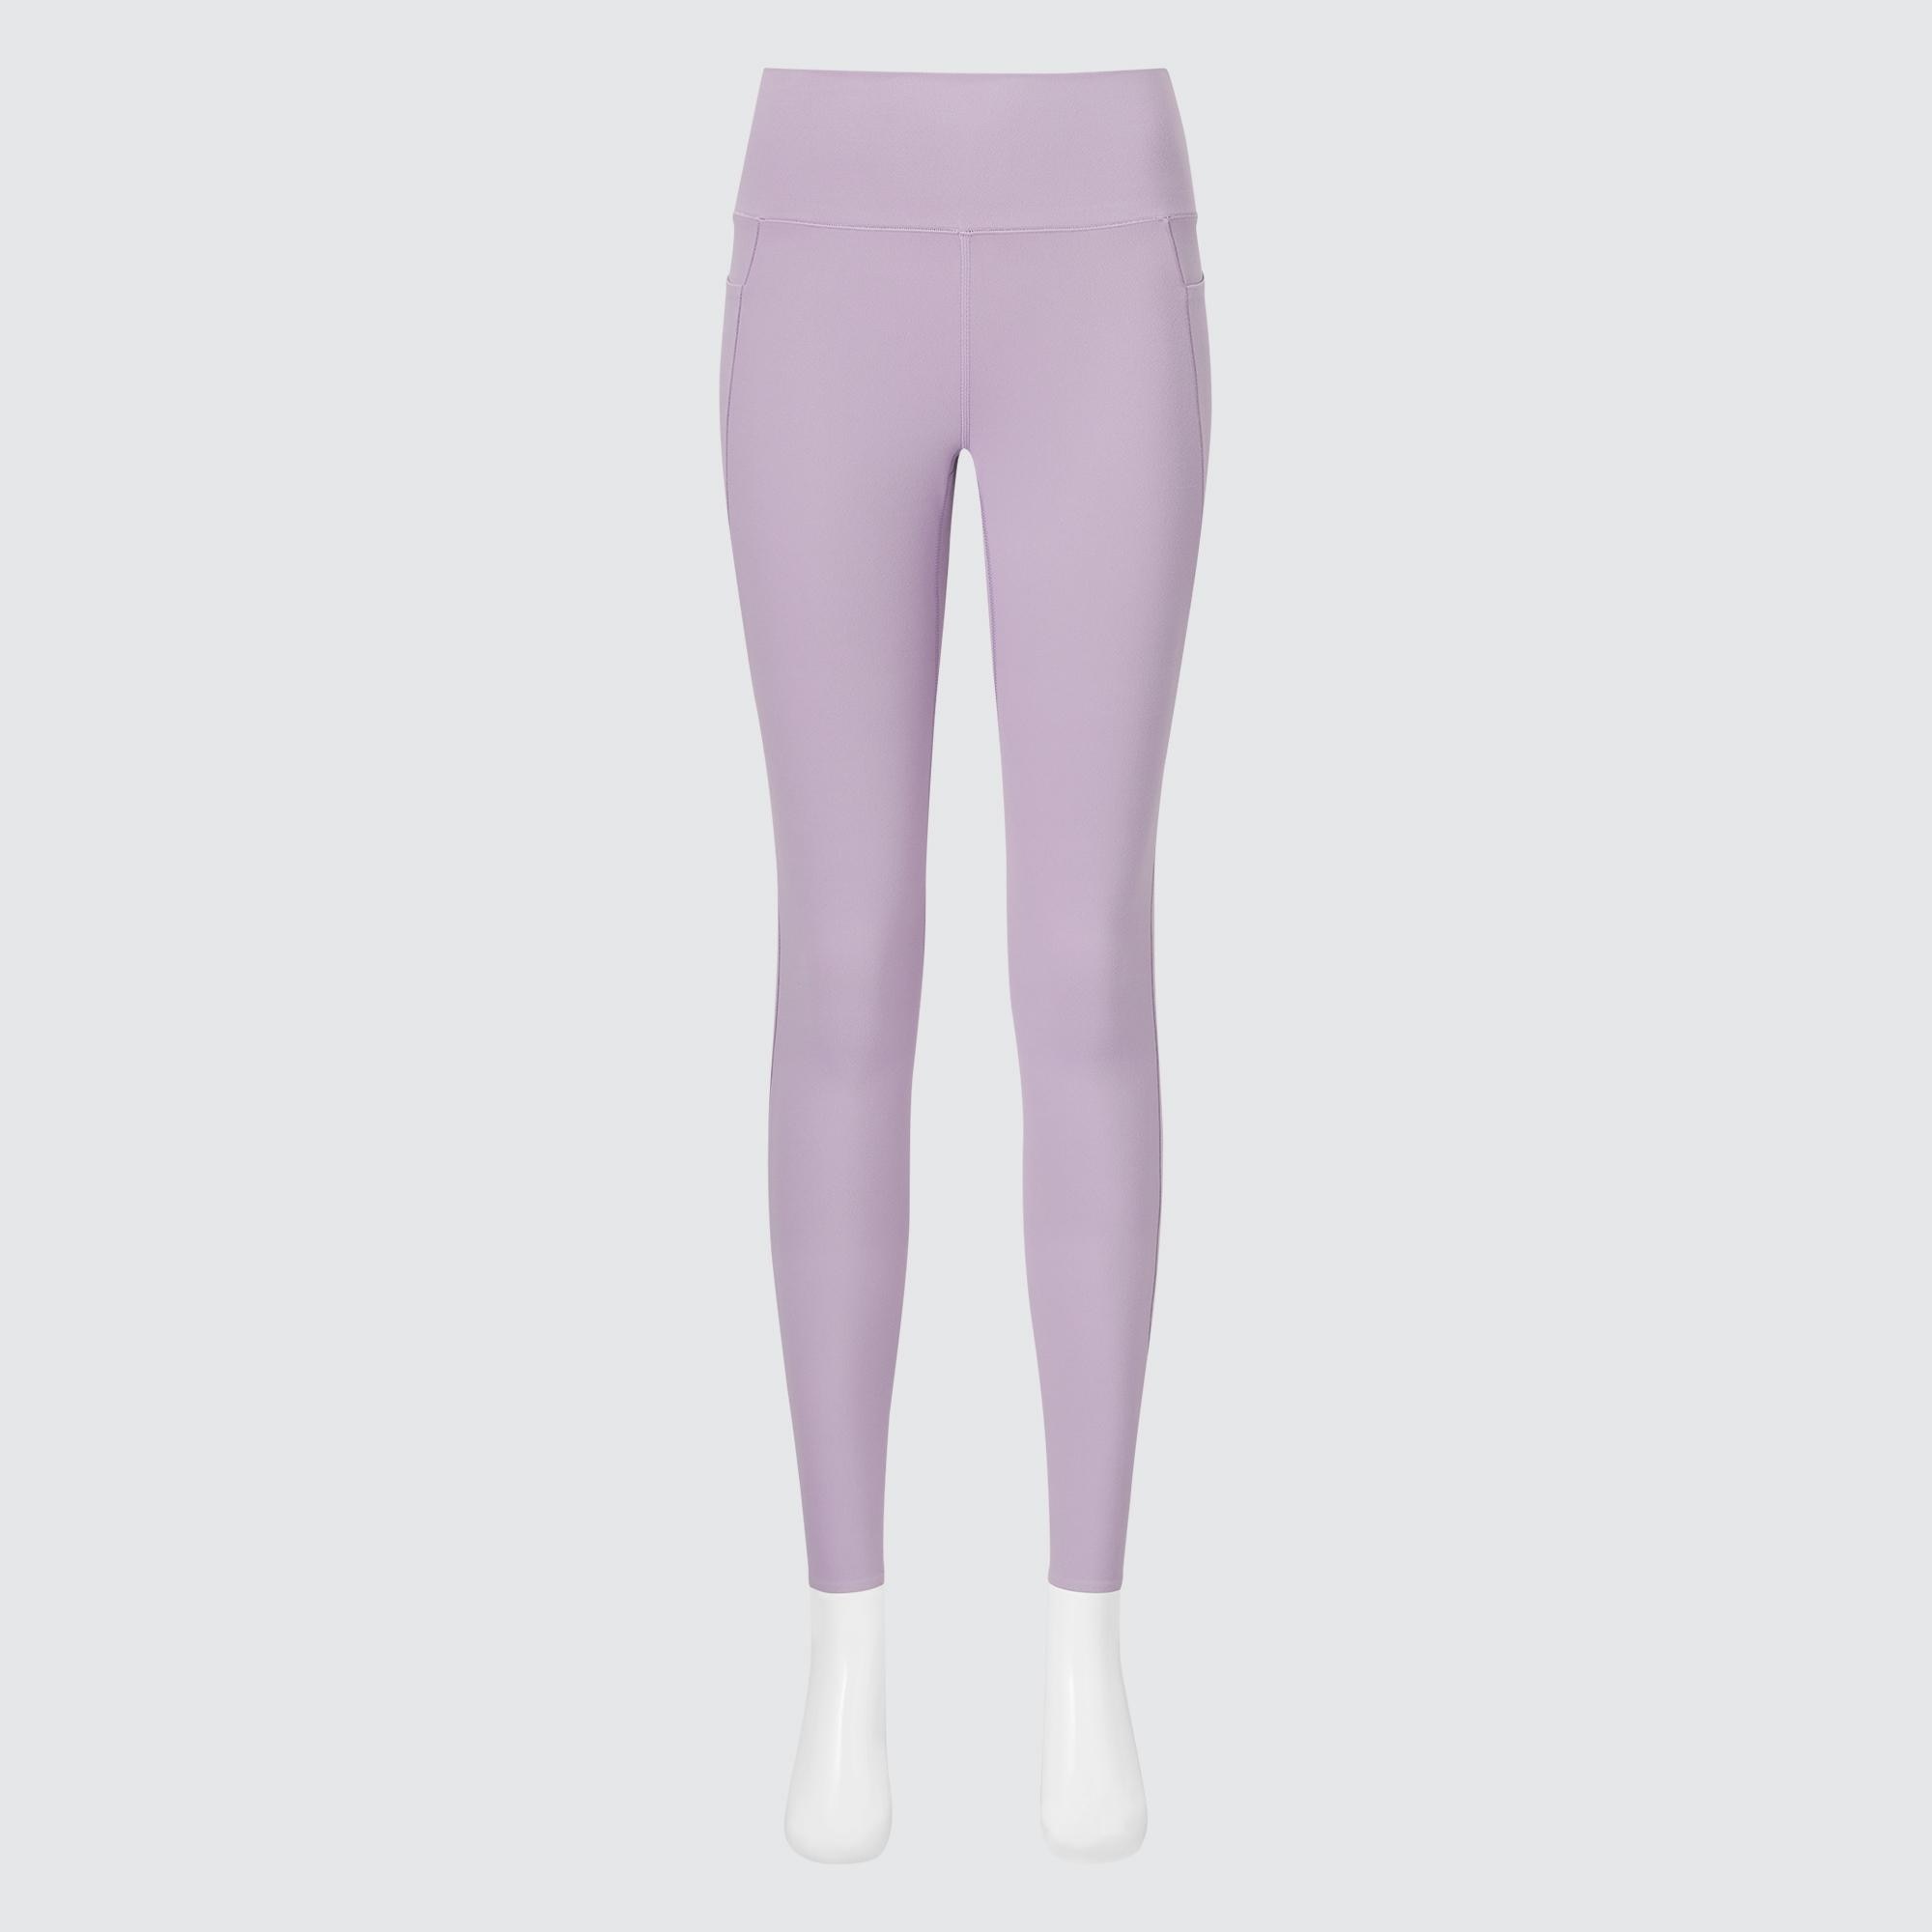 Check styling ideas for「AIRism UV Protection Pocketed Soft Leggings」